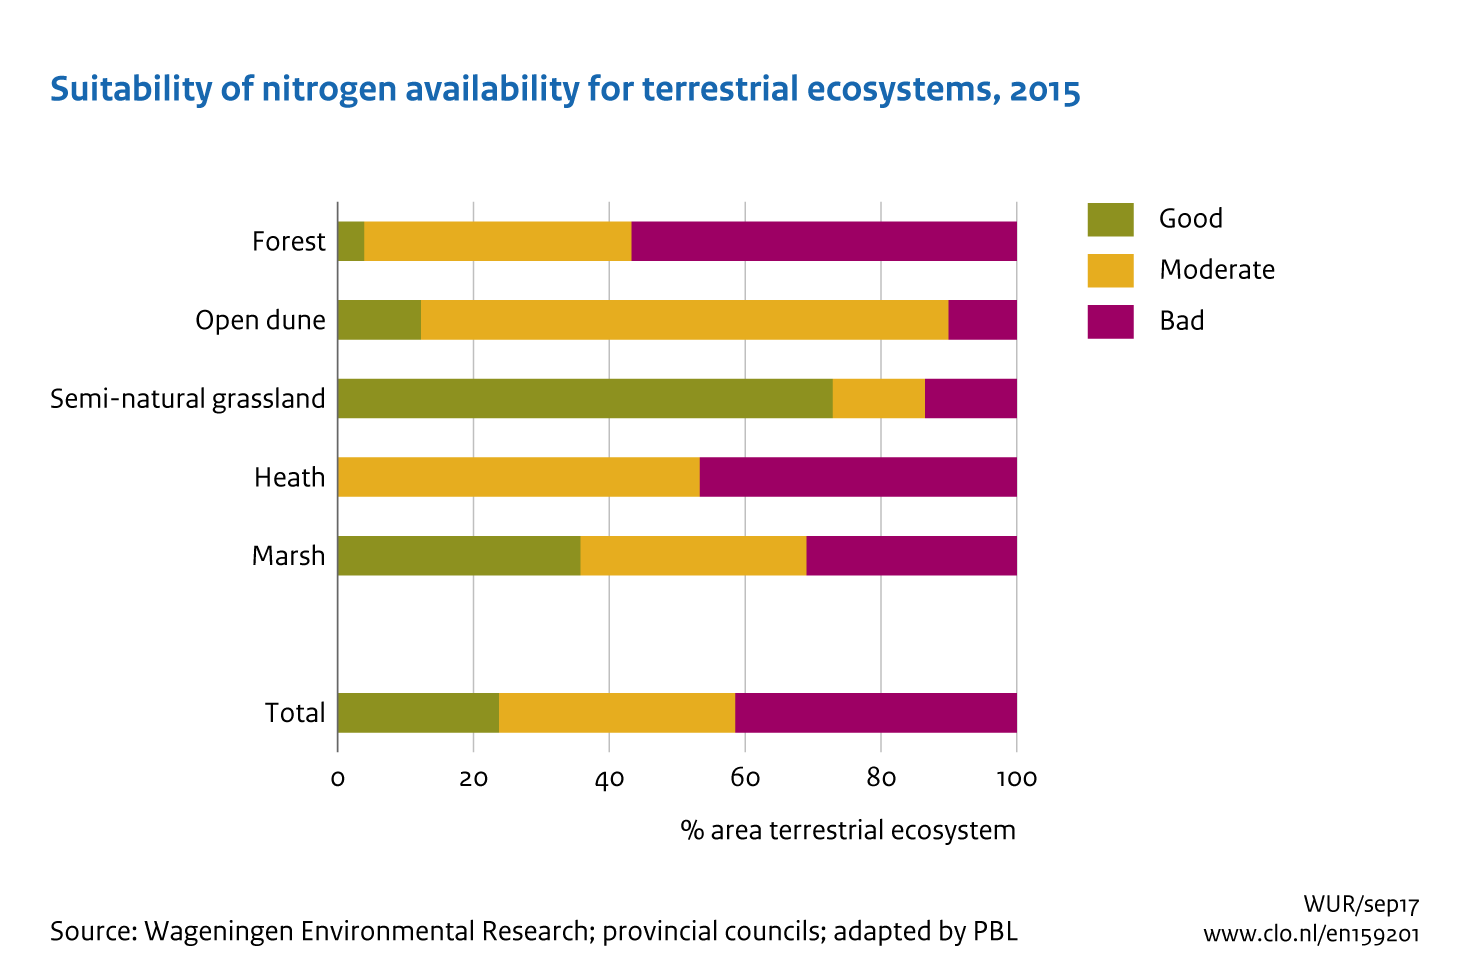 Image Suitability of nitrogen availability for terrestrial ecosystems. The image is further explained in the text.